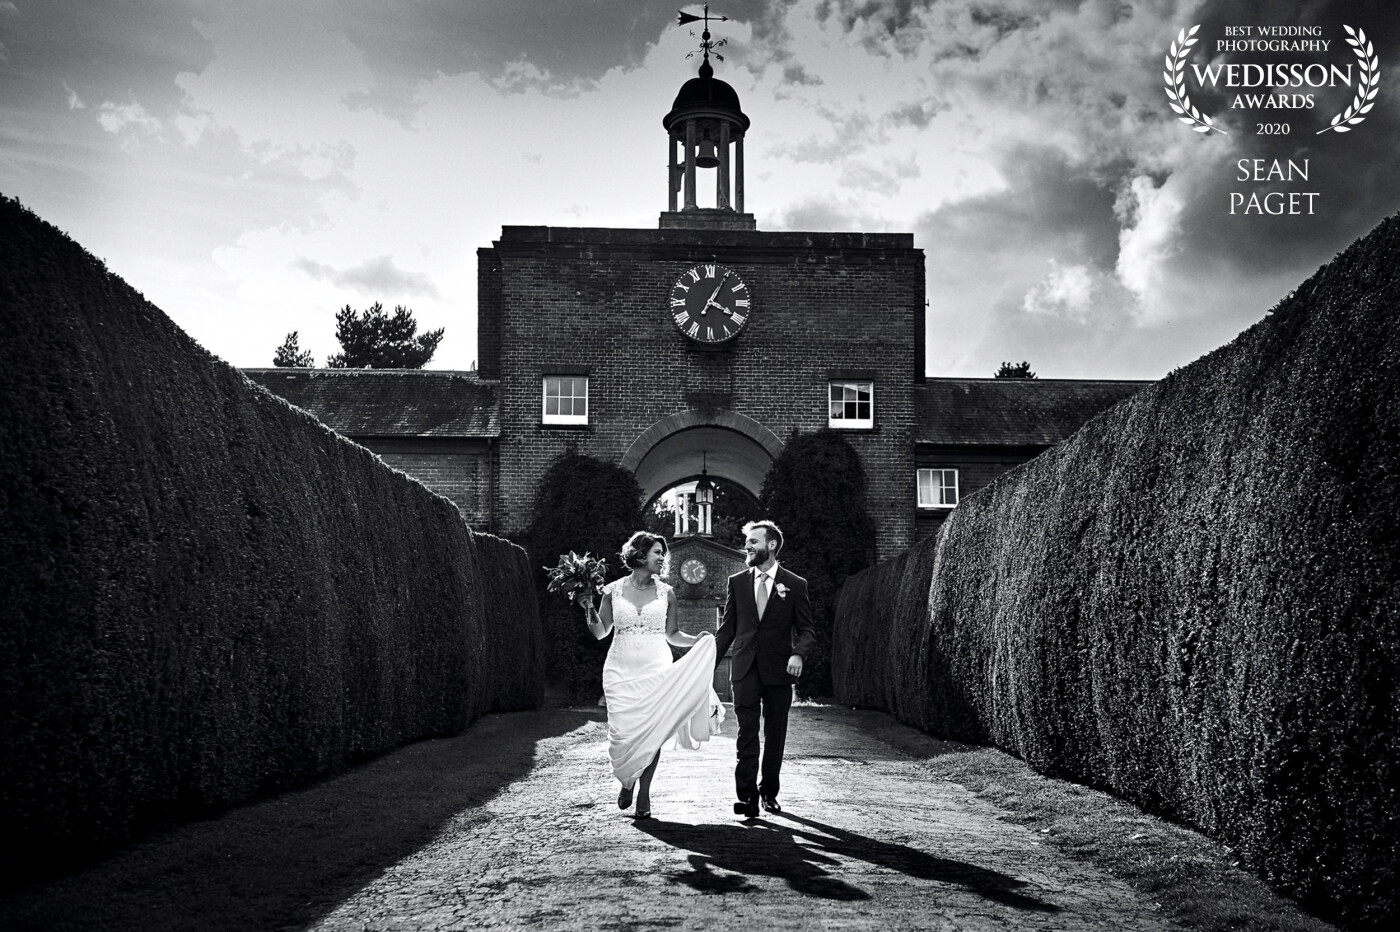 We'd just come back from a walk around the large estate at Walcot Hall in Shropshire, UK, shooting some bride and groom portraits. On the way back to the Hall for the wedding breakfast, I snapped a few shots walking backward on the way and this fell out. I just love the shadows and the symmetry that the hedges and the clock arch provided. Link to blog: https://seanpaget.com/eclectic-walcot-hall-wedding-photography/